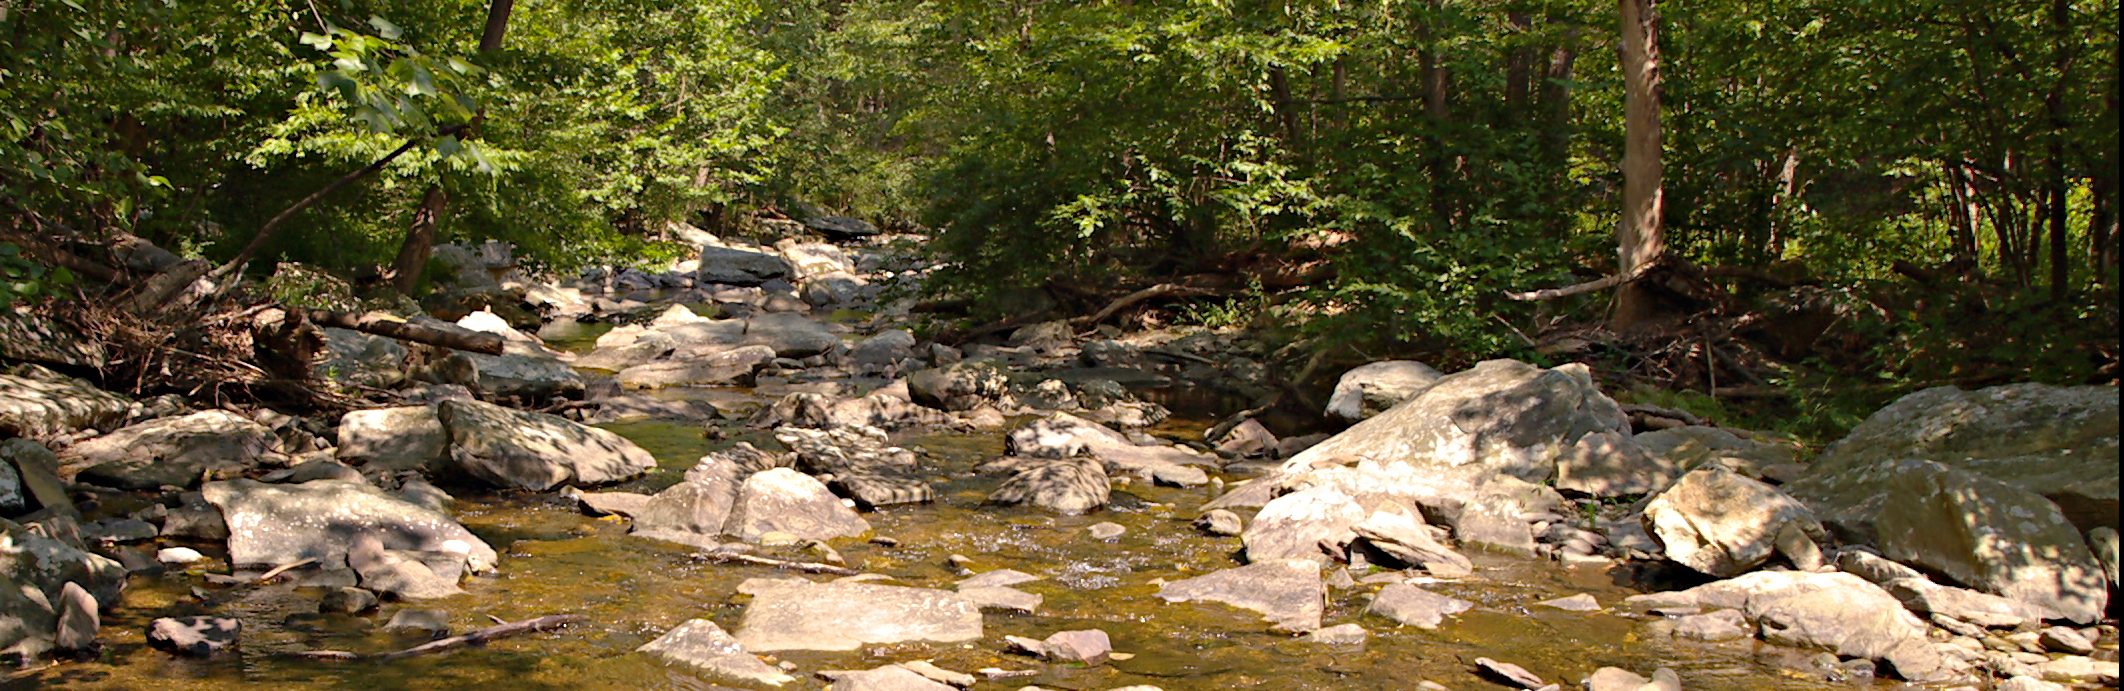 A shallow, rocky creek with trees hanging over the banks.